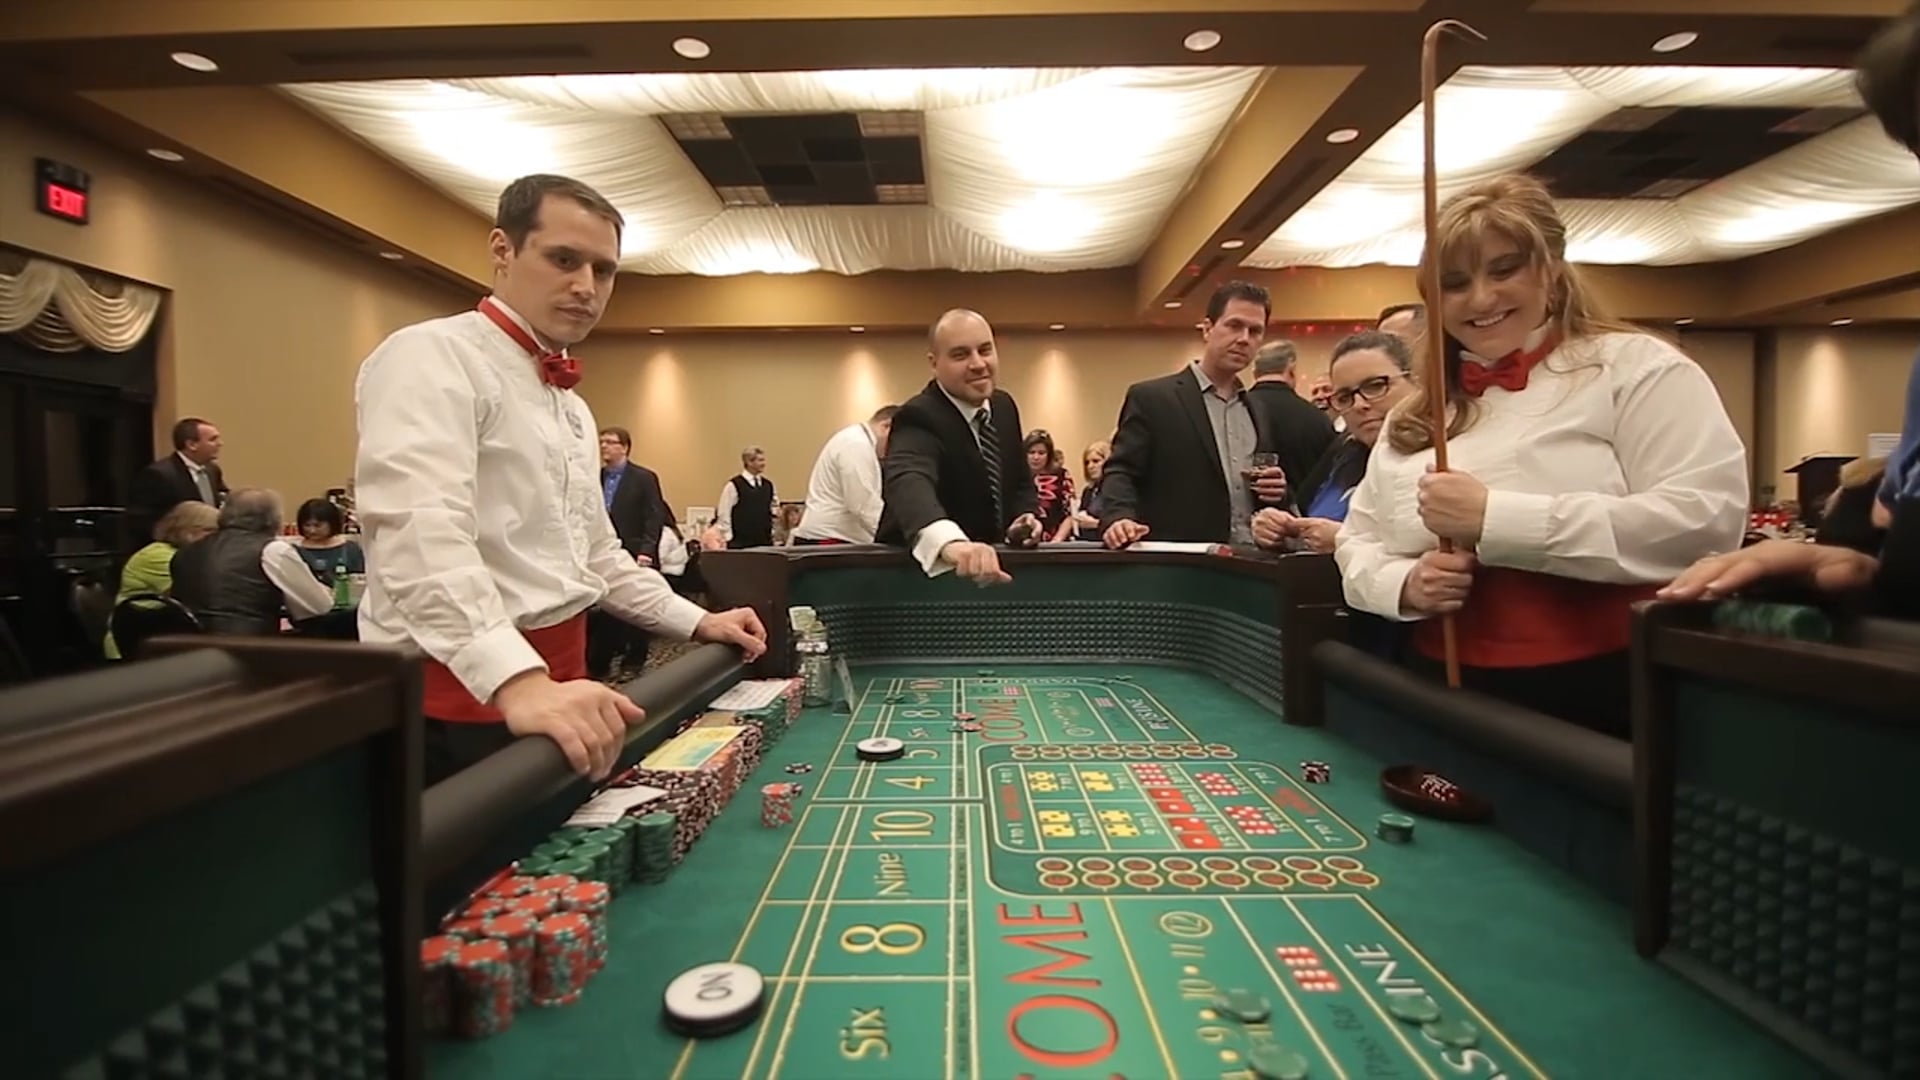 Promotional video thumbnail 1 for Elite Casino Events